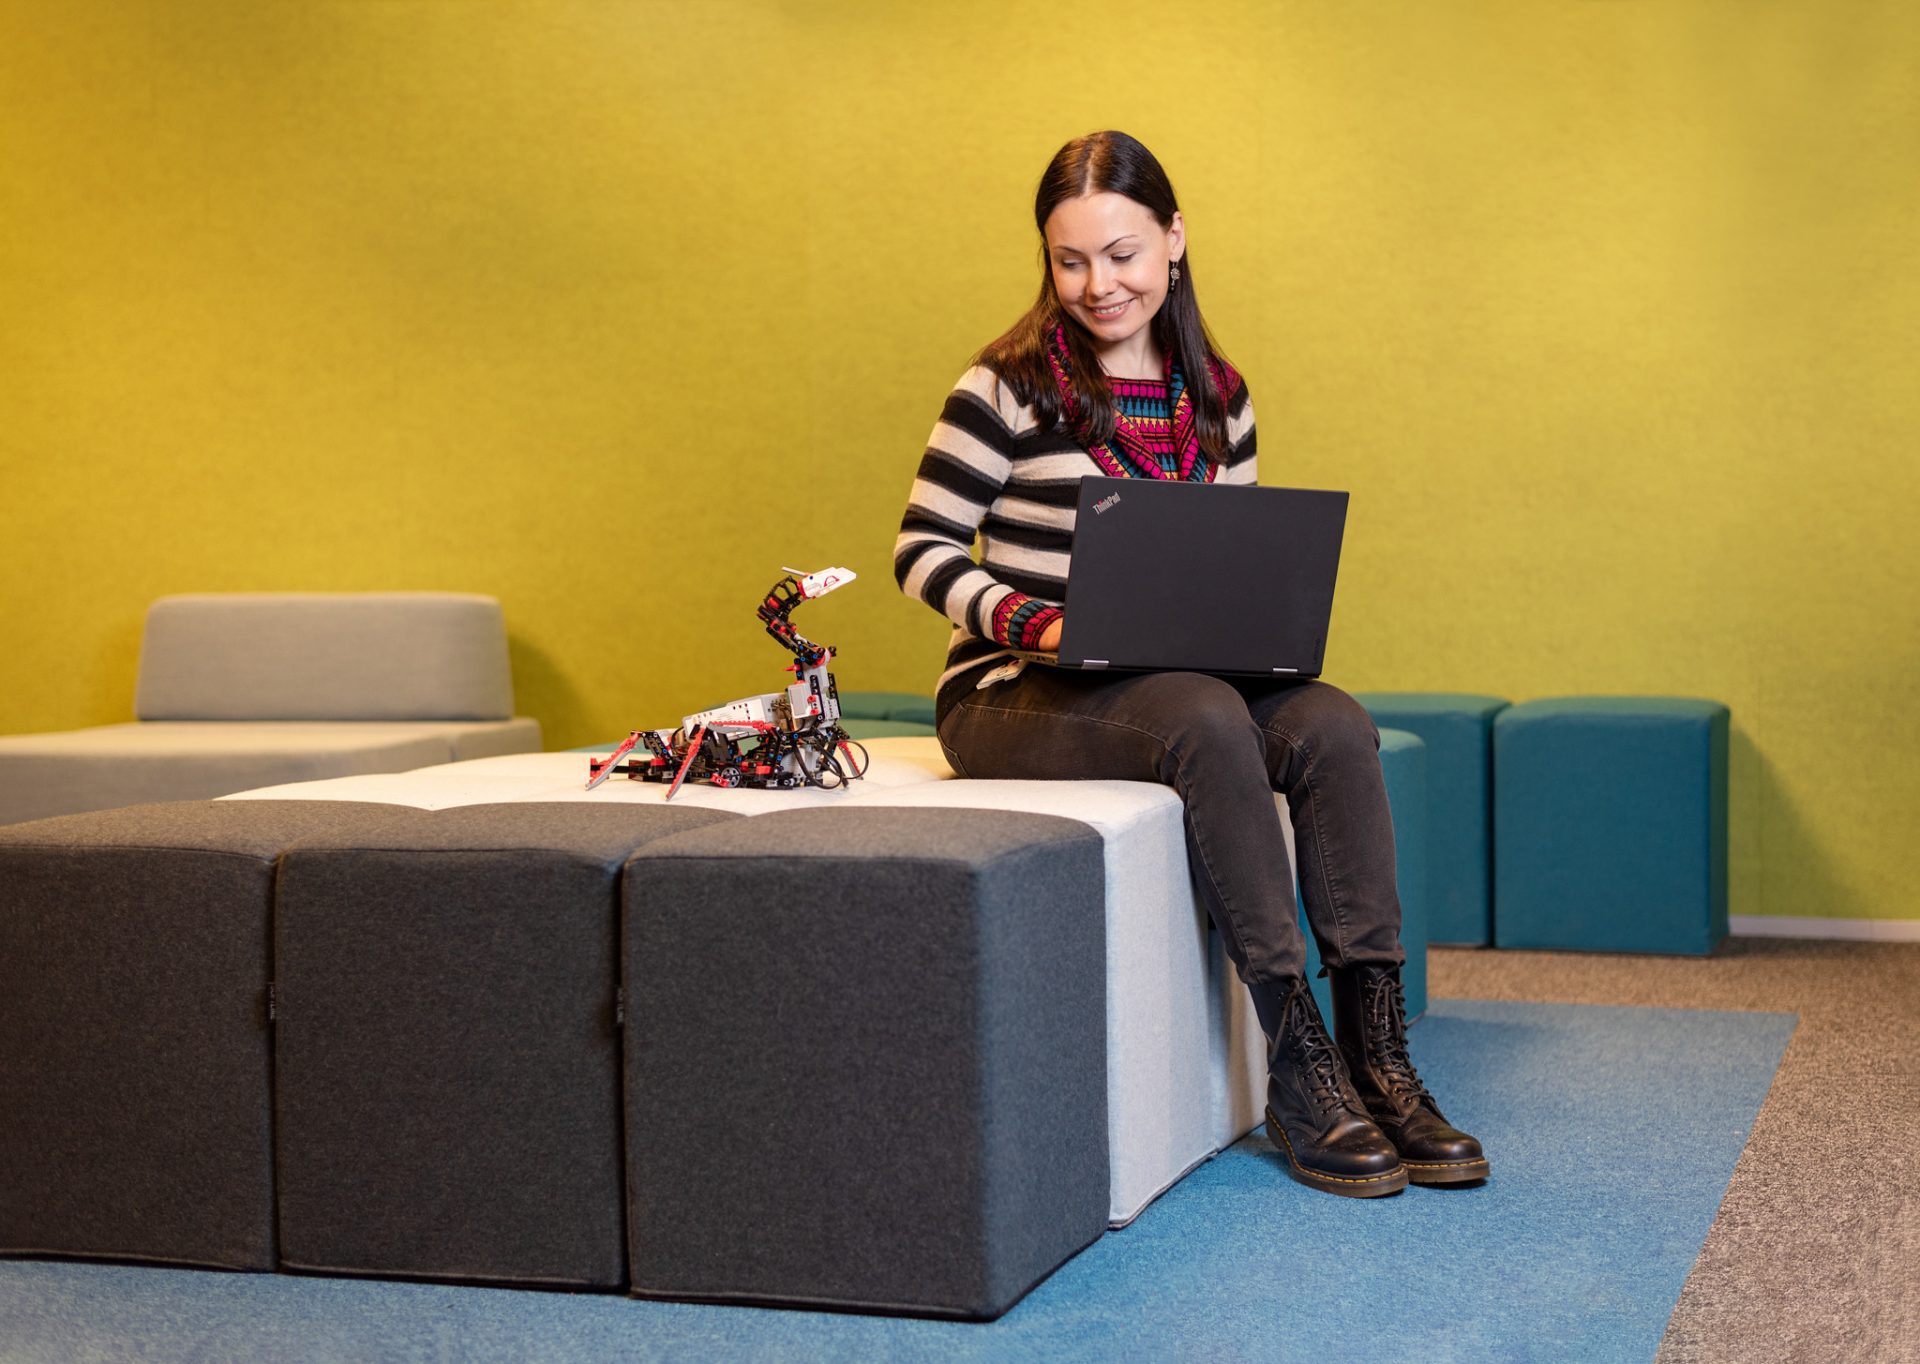 Test Engineer Karina Pietere sitting with her laptop and a toy robot.